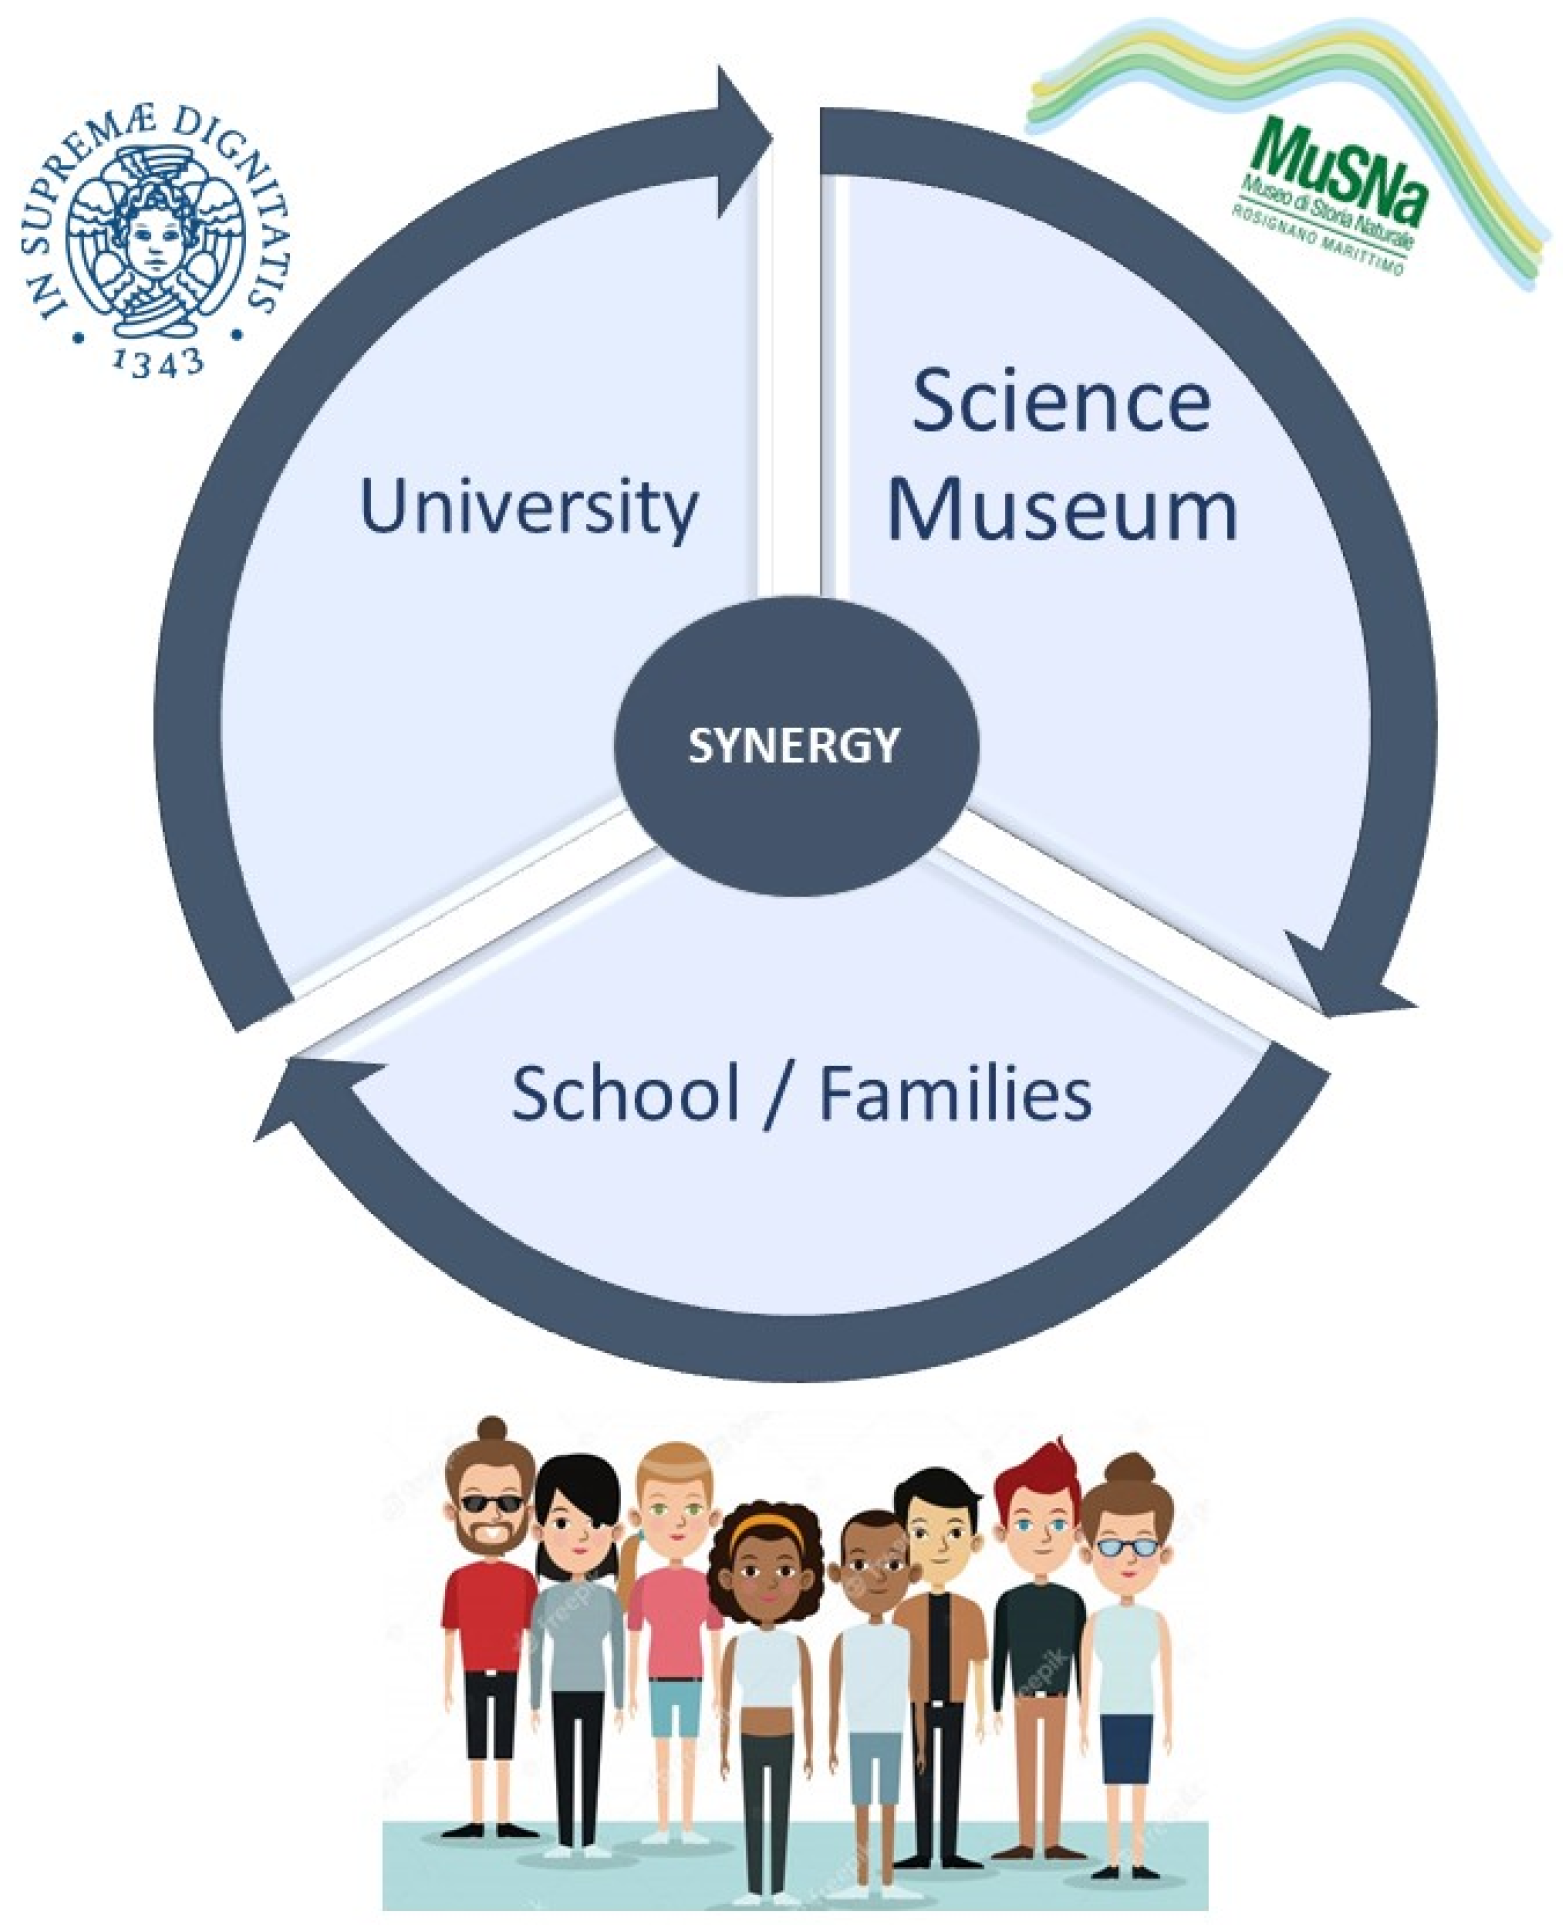 High-level view of the three elements of the STEAM framework. The